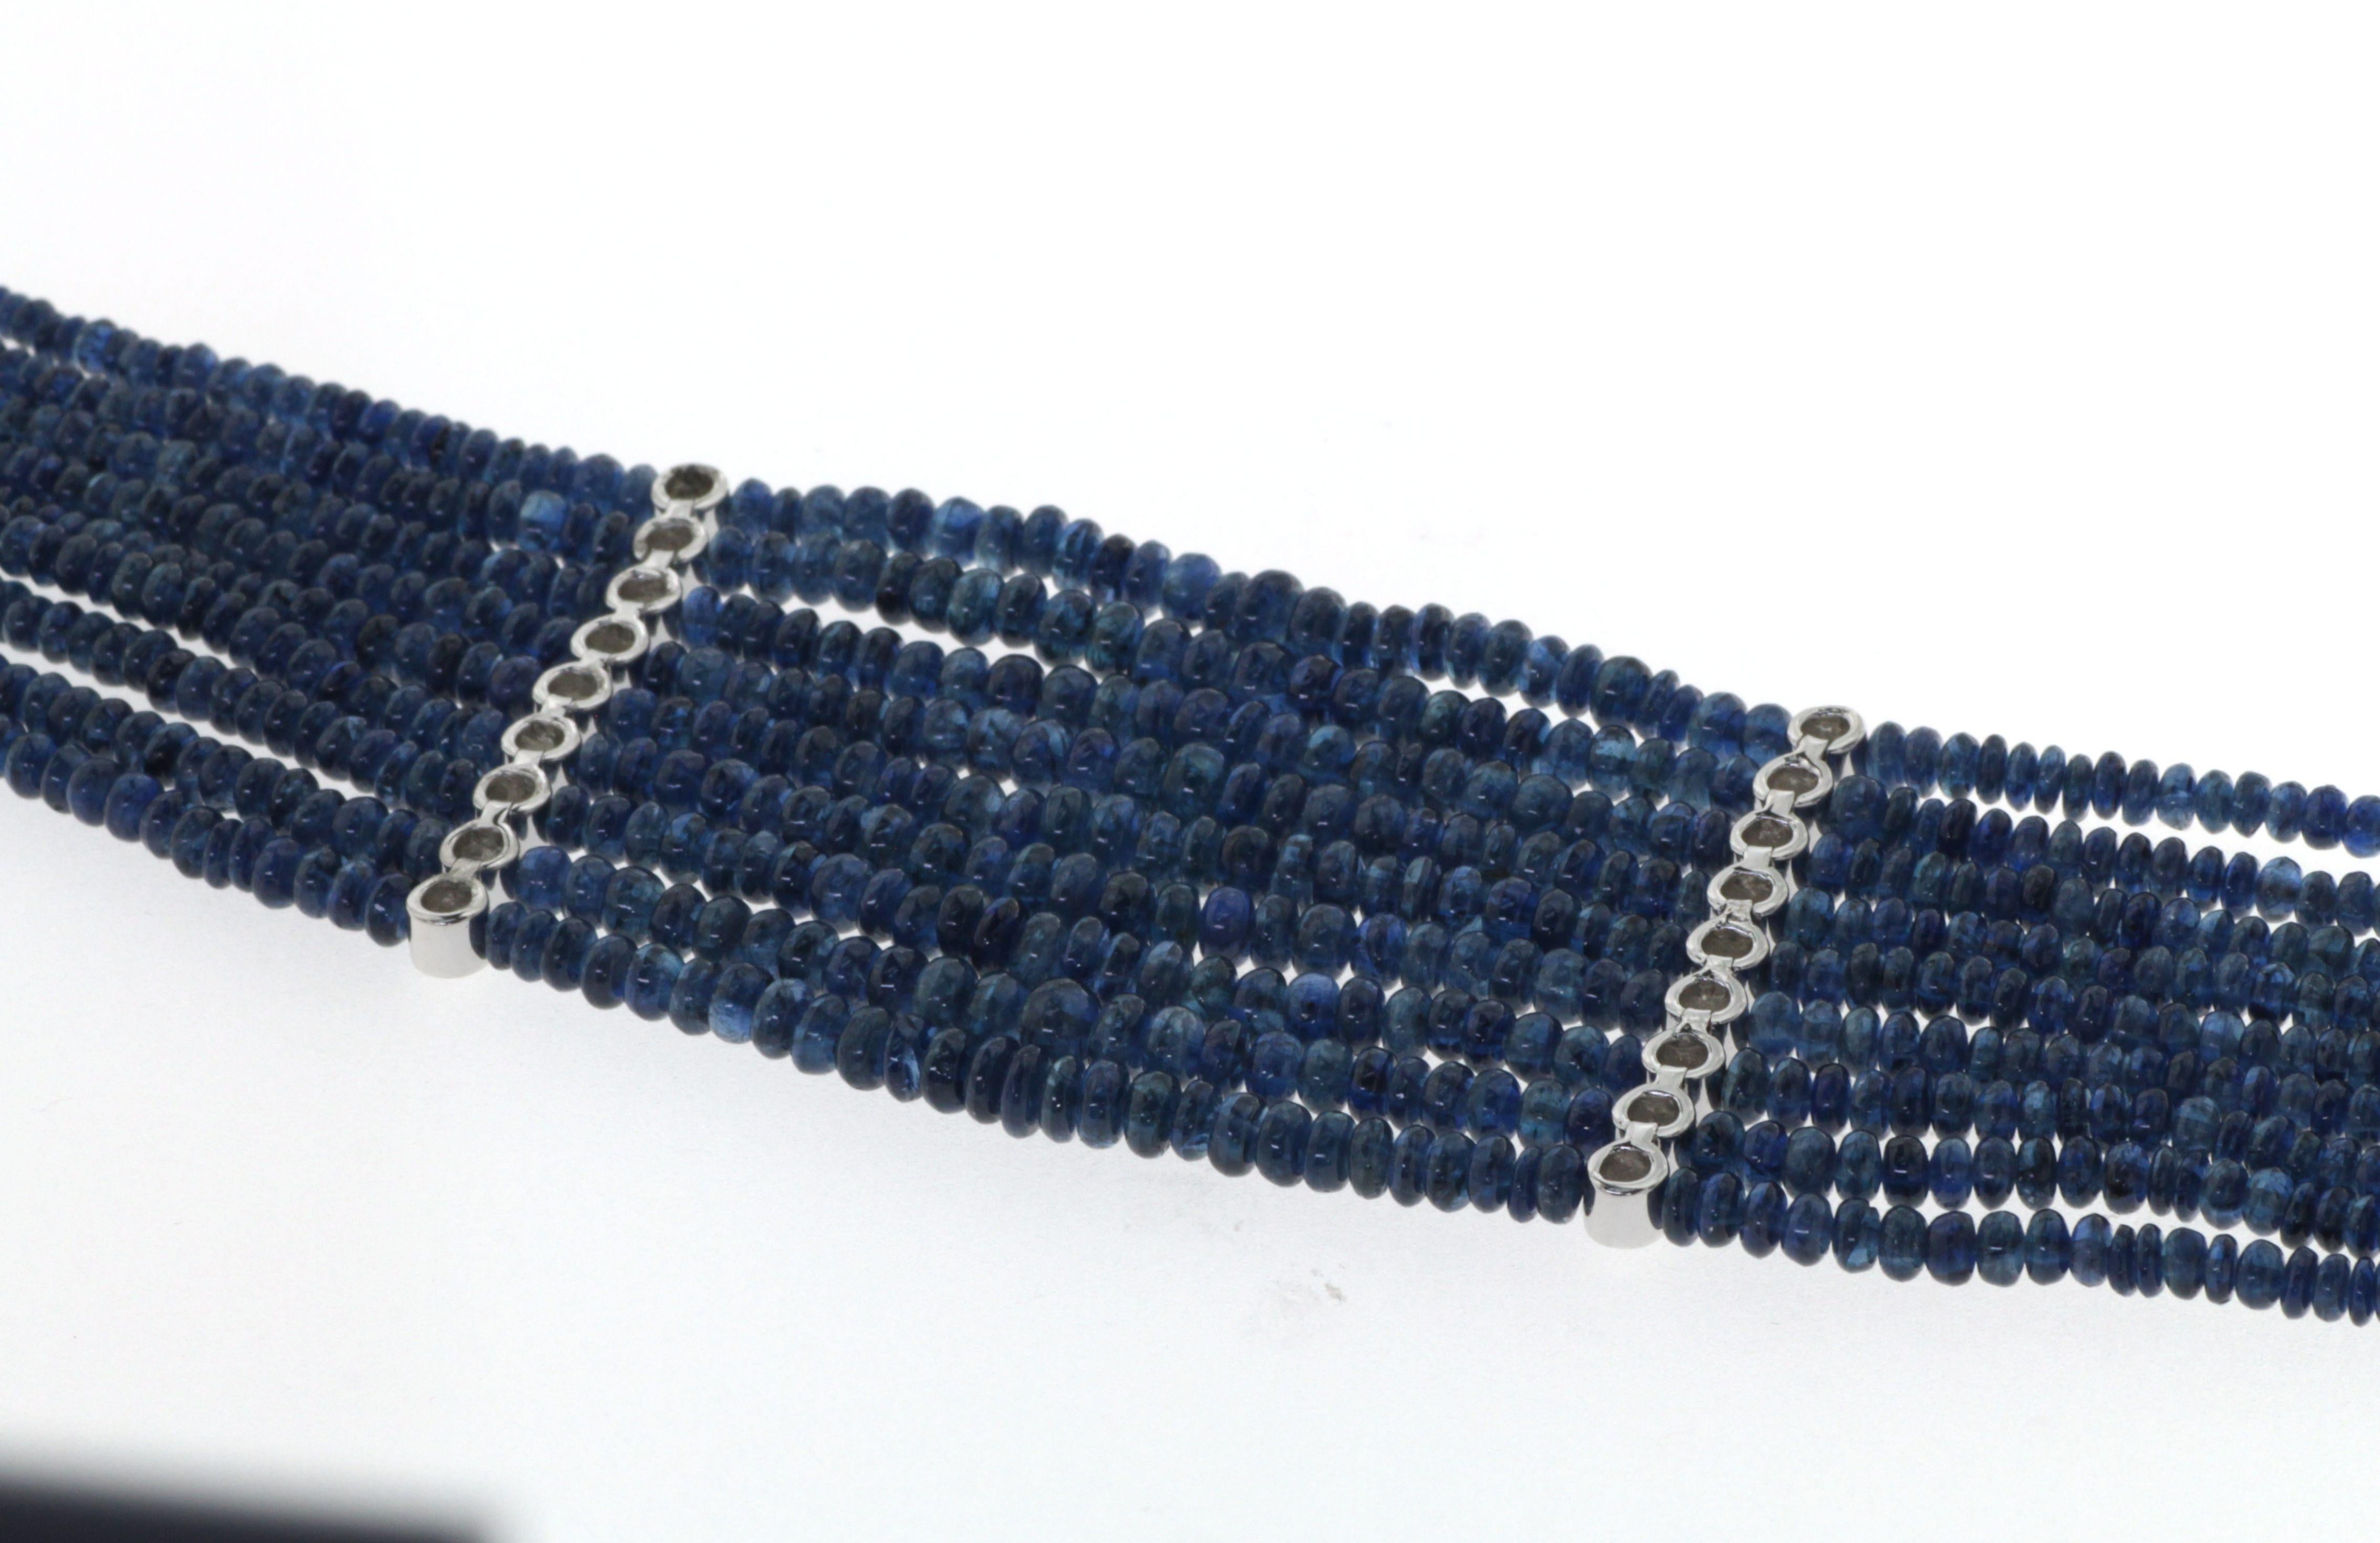 This bracelet features 159.53 carats of beads shape blue sapphire, assented with 1.82 carat of round diamonds. This piece is handmade in 18 karat white gold.
Blue Sapphire 159.53 carat
Diamond 1.82 carat